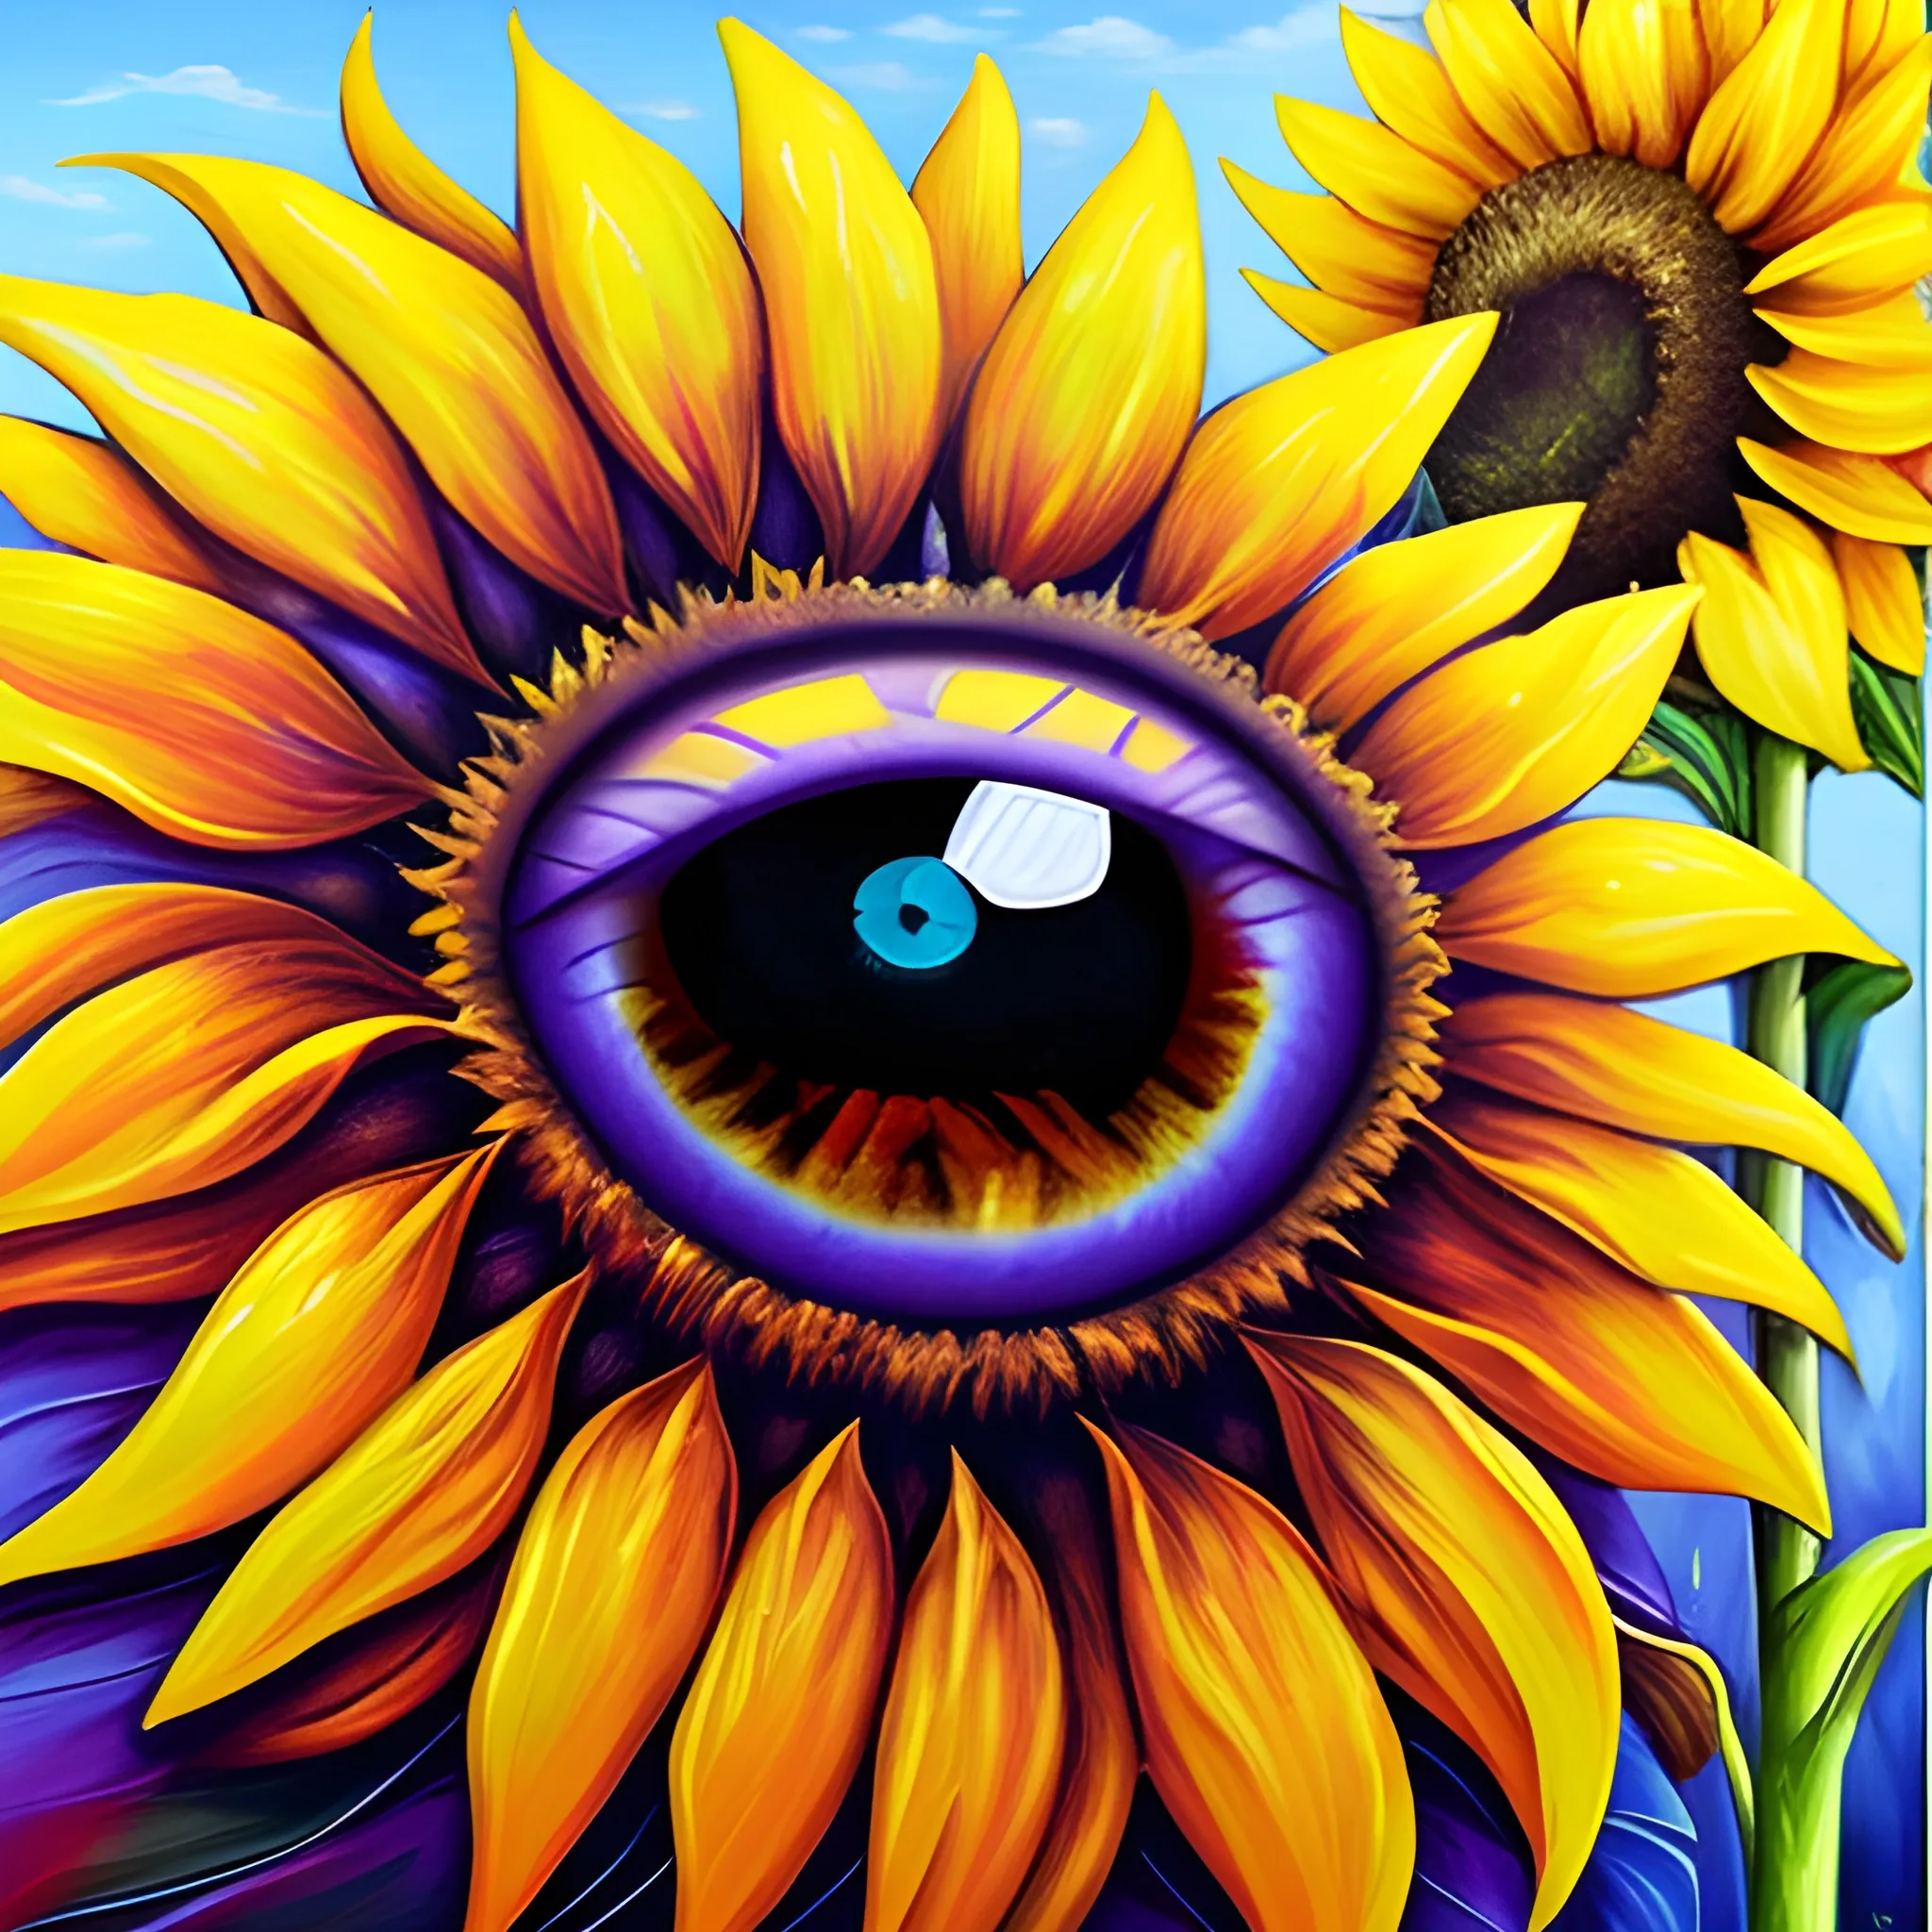 Oil painting style, rich and gorgeous colors, clear layers, yellow, purple, red sunflowers, some are blooming, some are drooping, there is an eye in the center of the sunflower, ultra-high-definition picture quality, Oil Painting, 3D, Cartoon